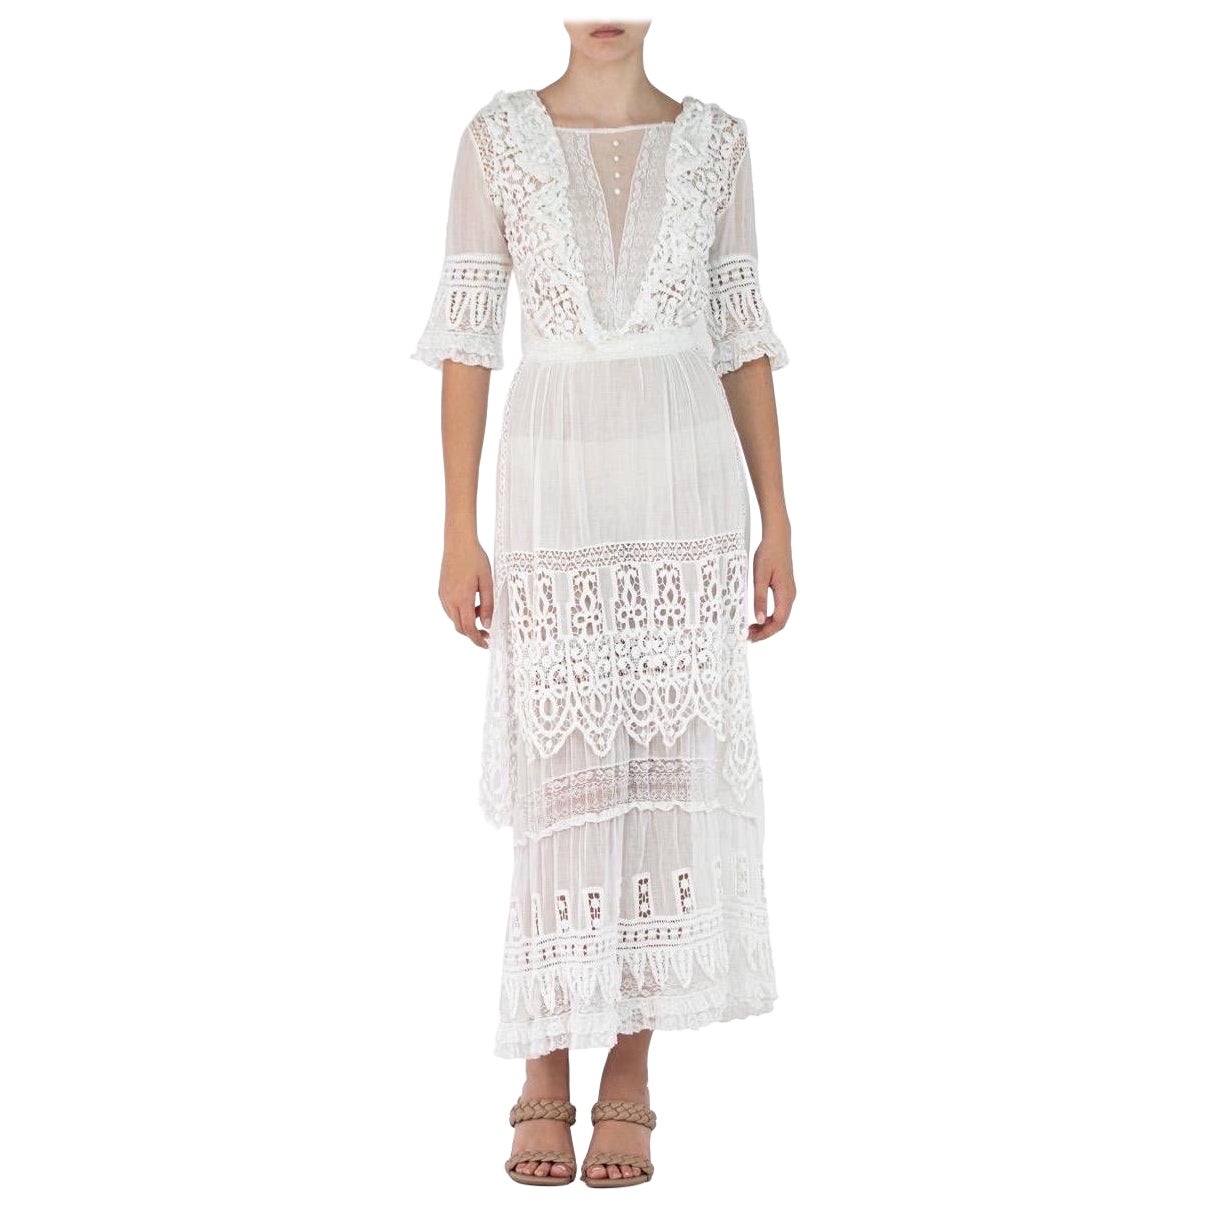 Edwardian White Organic Cotton Voile Dress With Embroidery And Lace For Sale